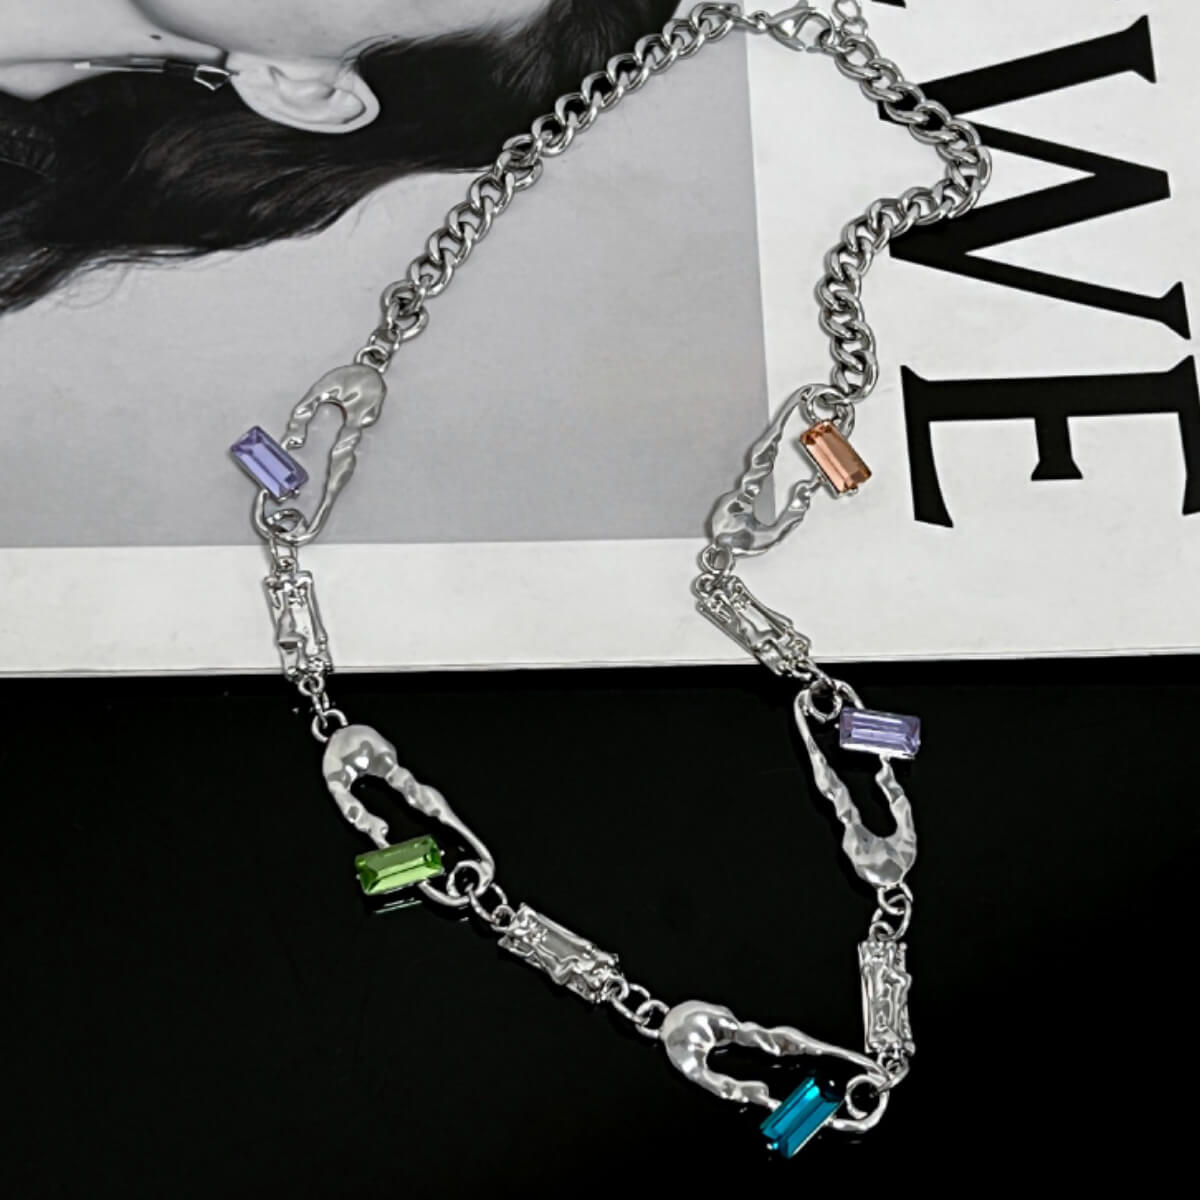 Vintage Style Clavicle Chain Gemstone Necklace  Buy at Khanie